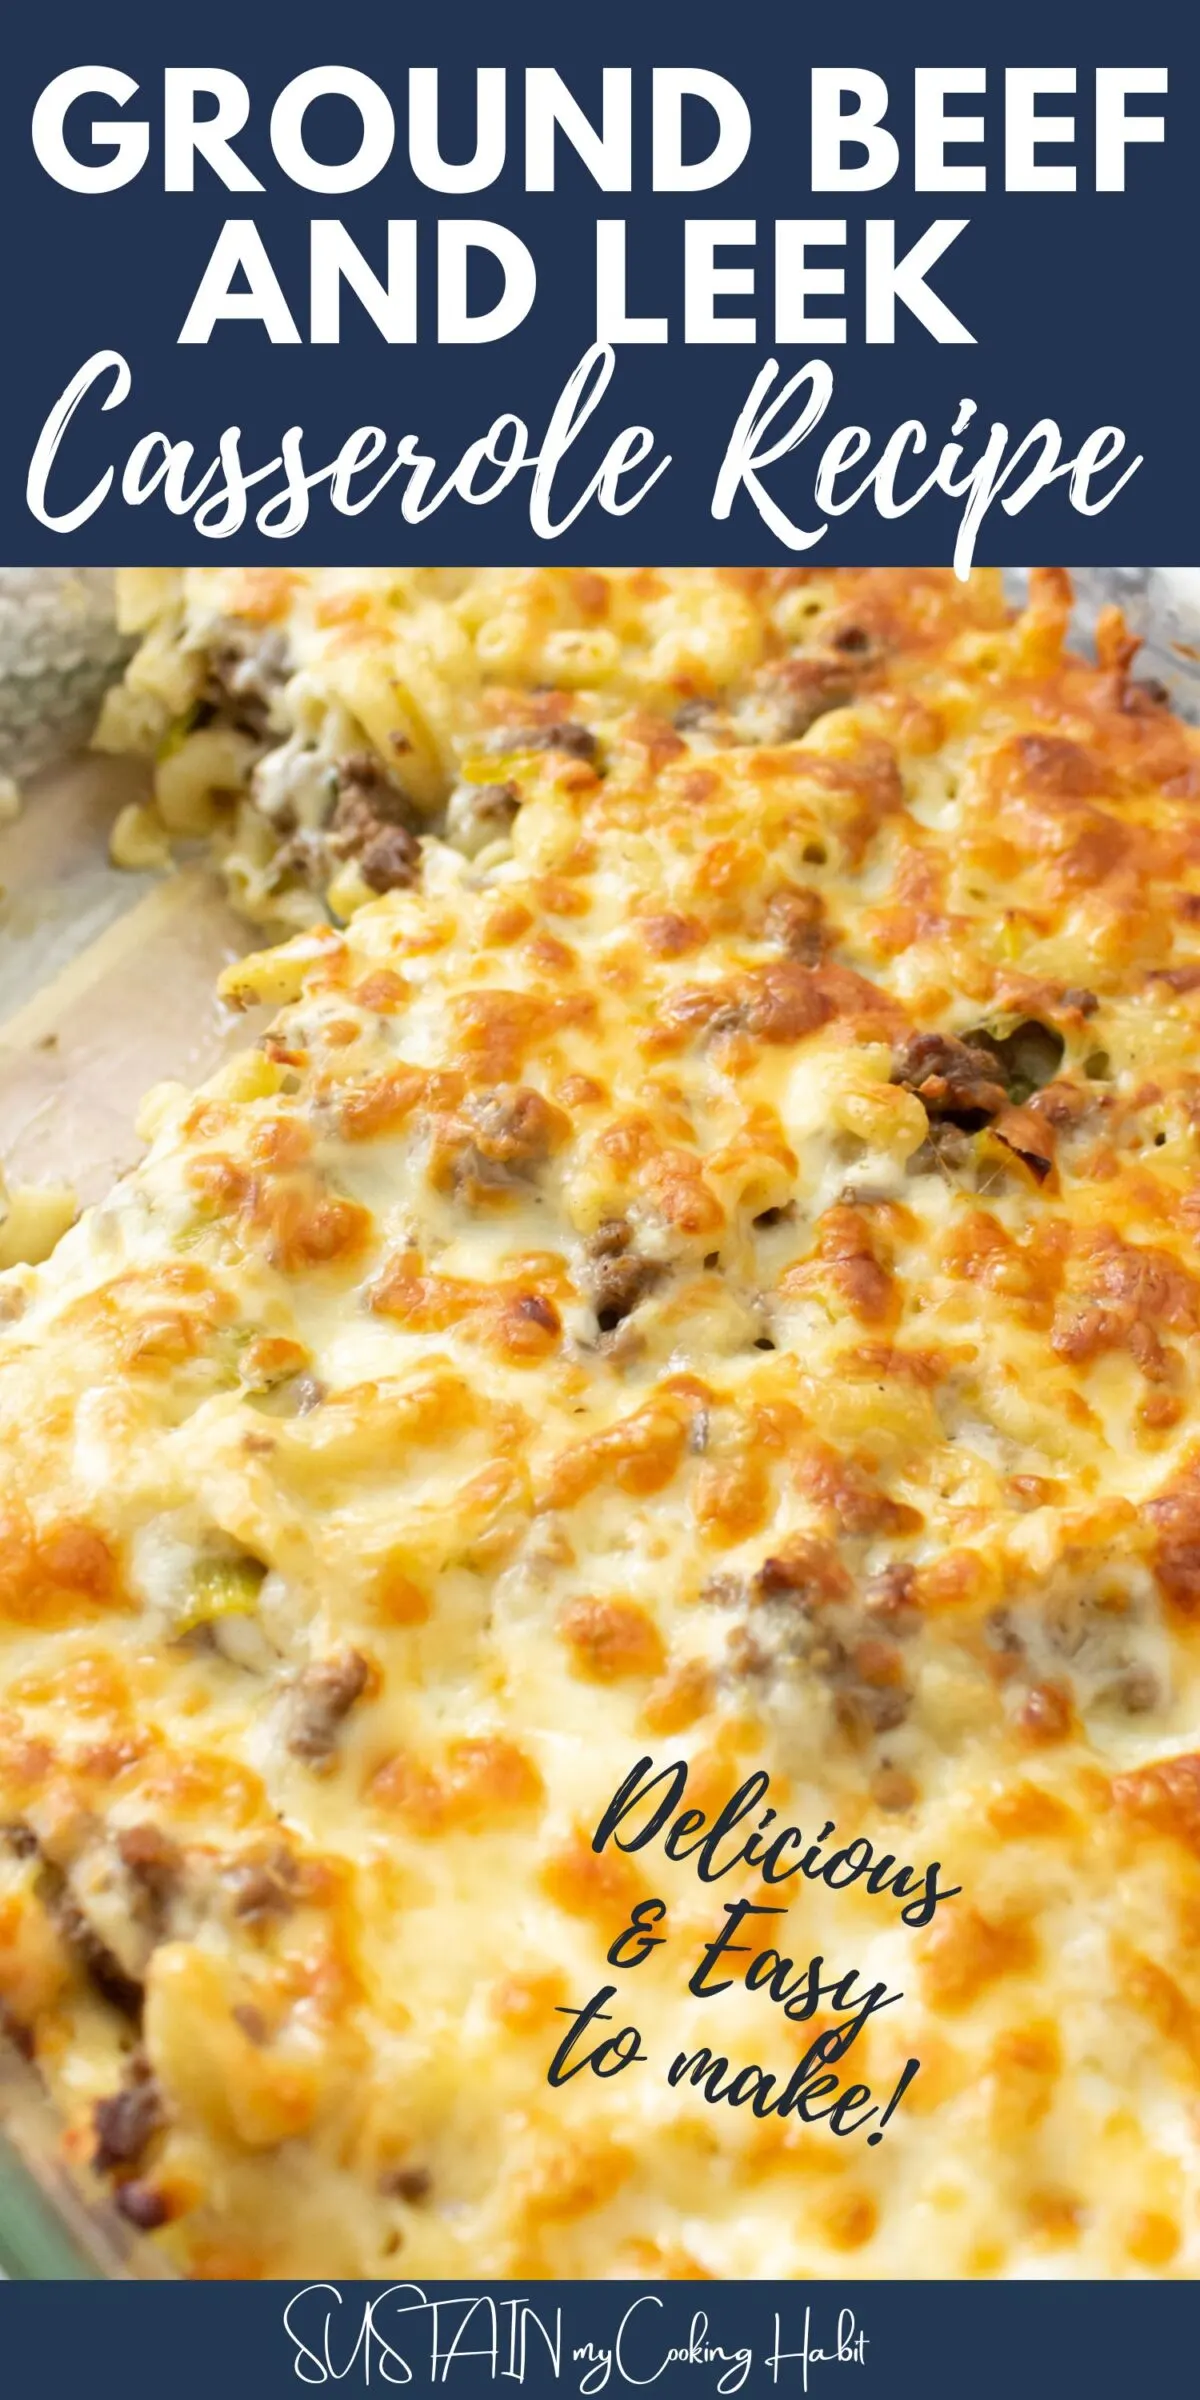 Ground beef, leek and cheese casserole with text overlay.